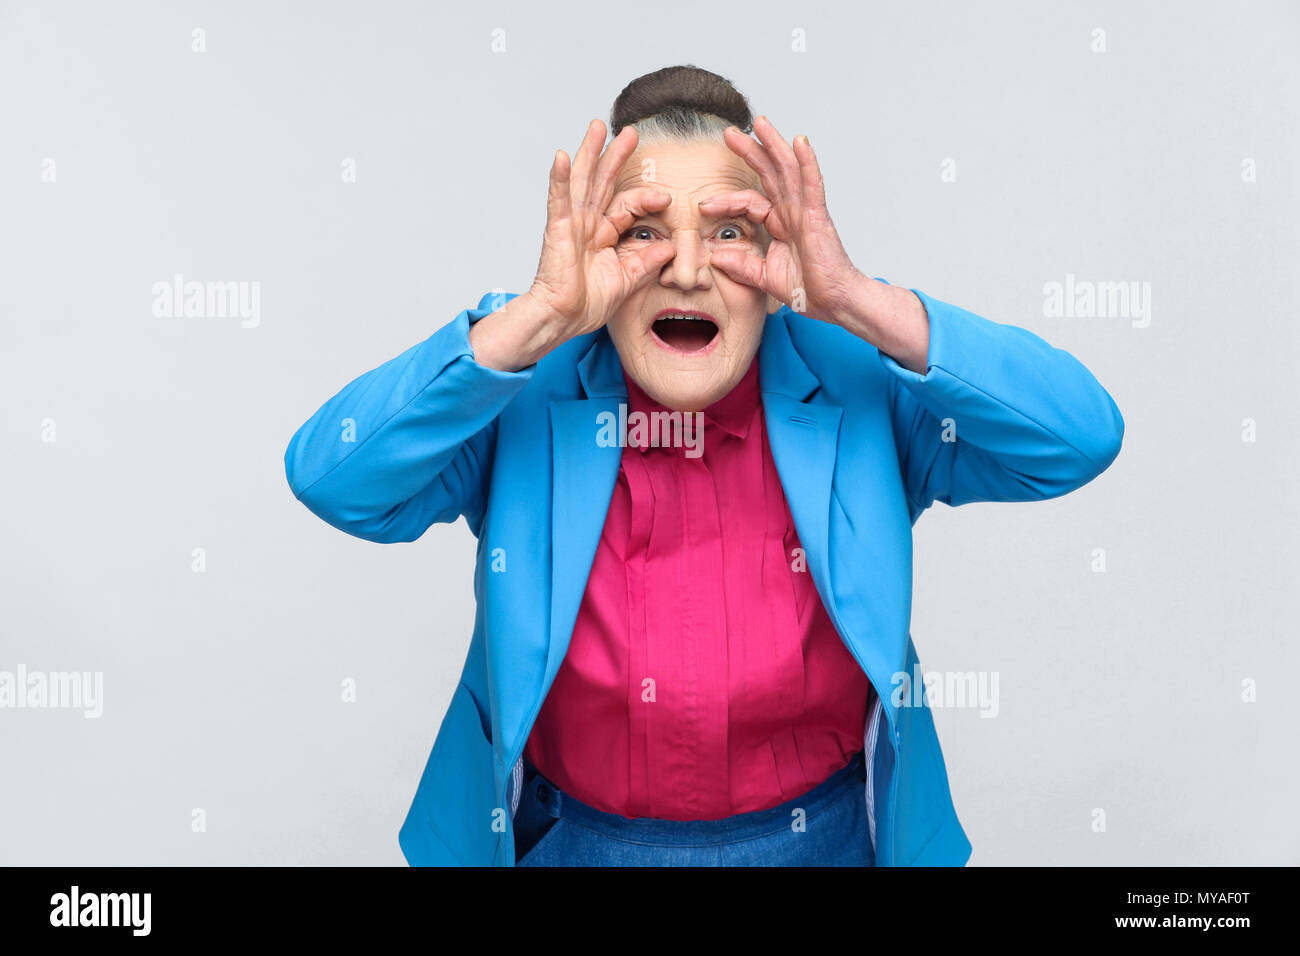 Aged grandmother with shocked face. Emotion and feelings concept. Portrait of grandmother with light blue suit and pink shirt standing with collected  Stock Photo